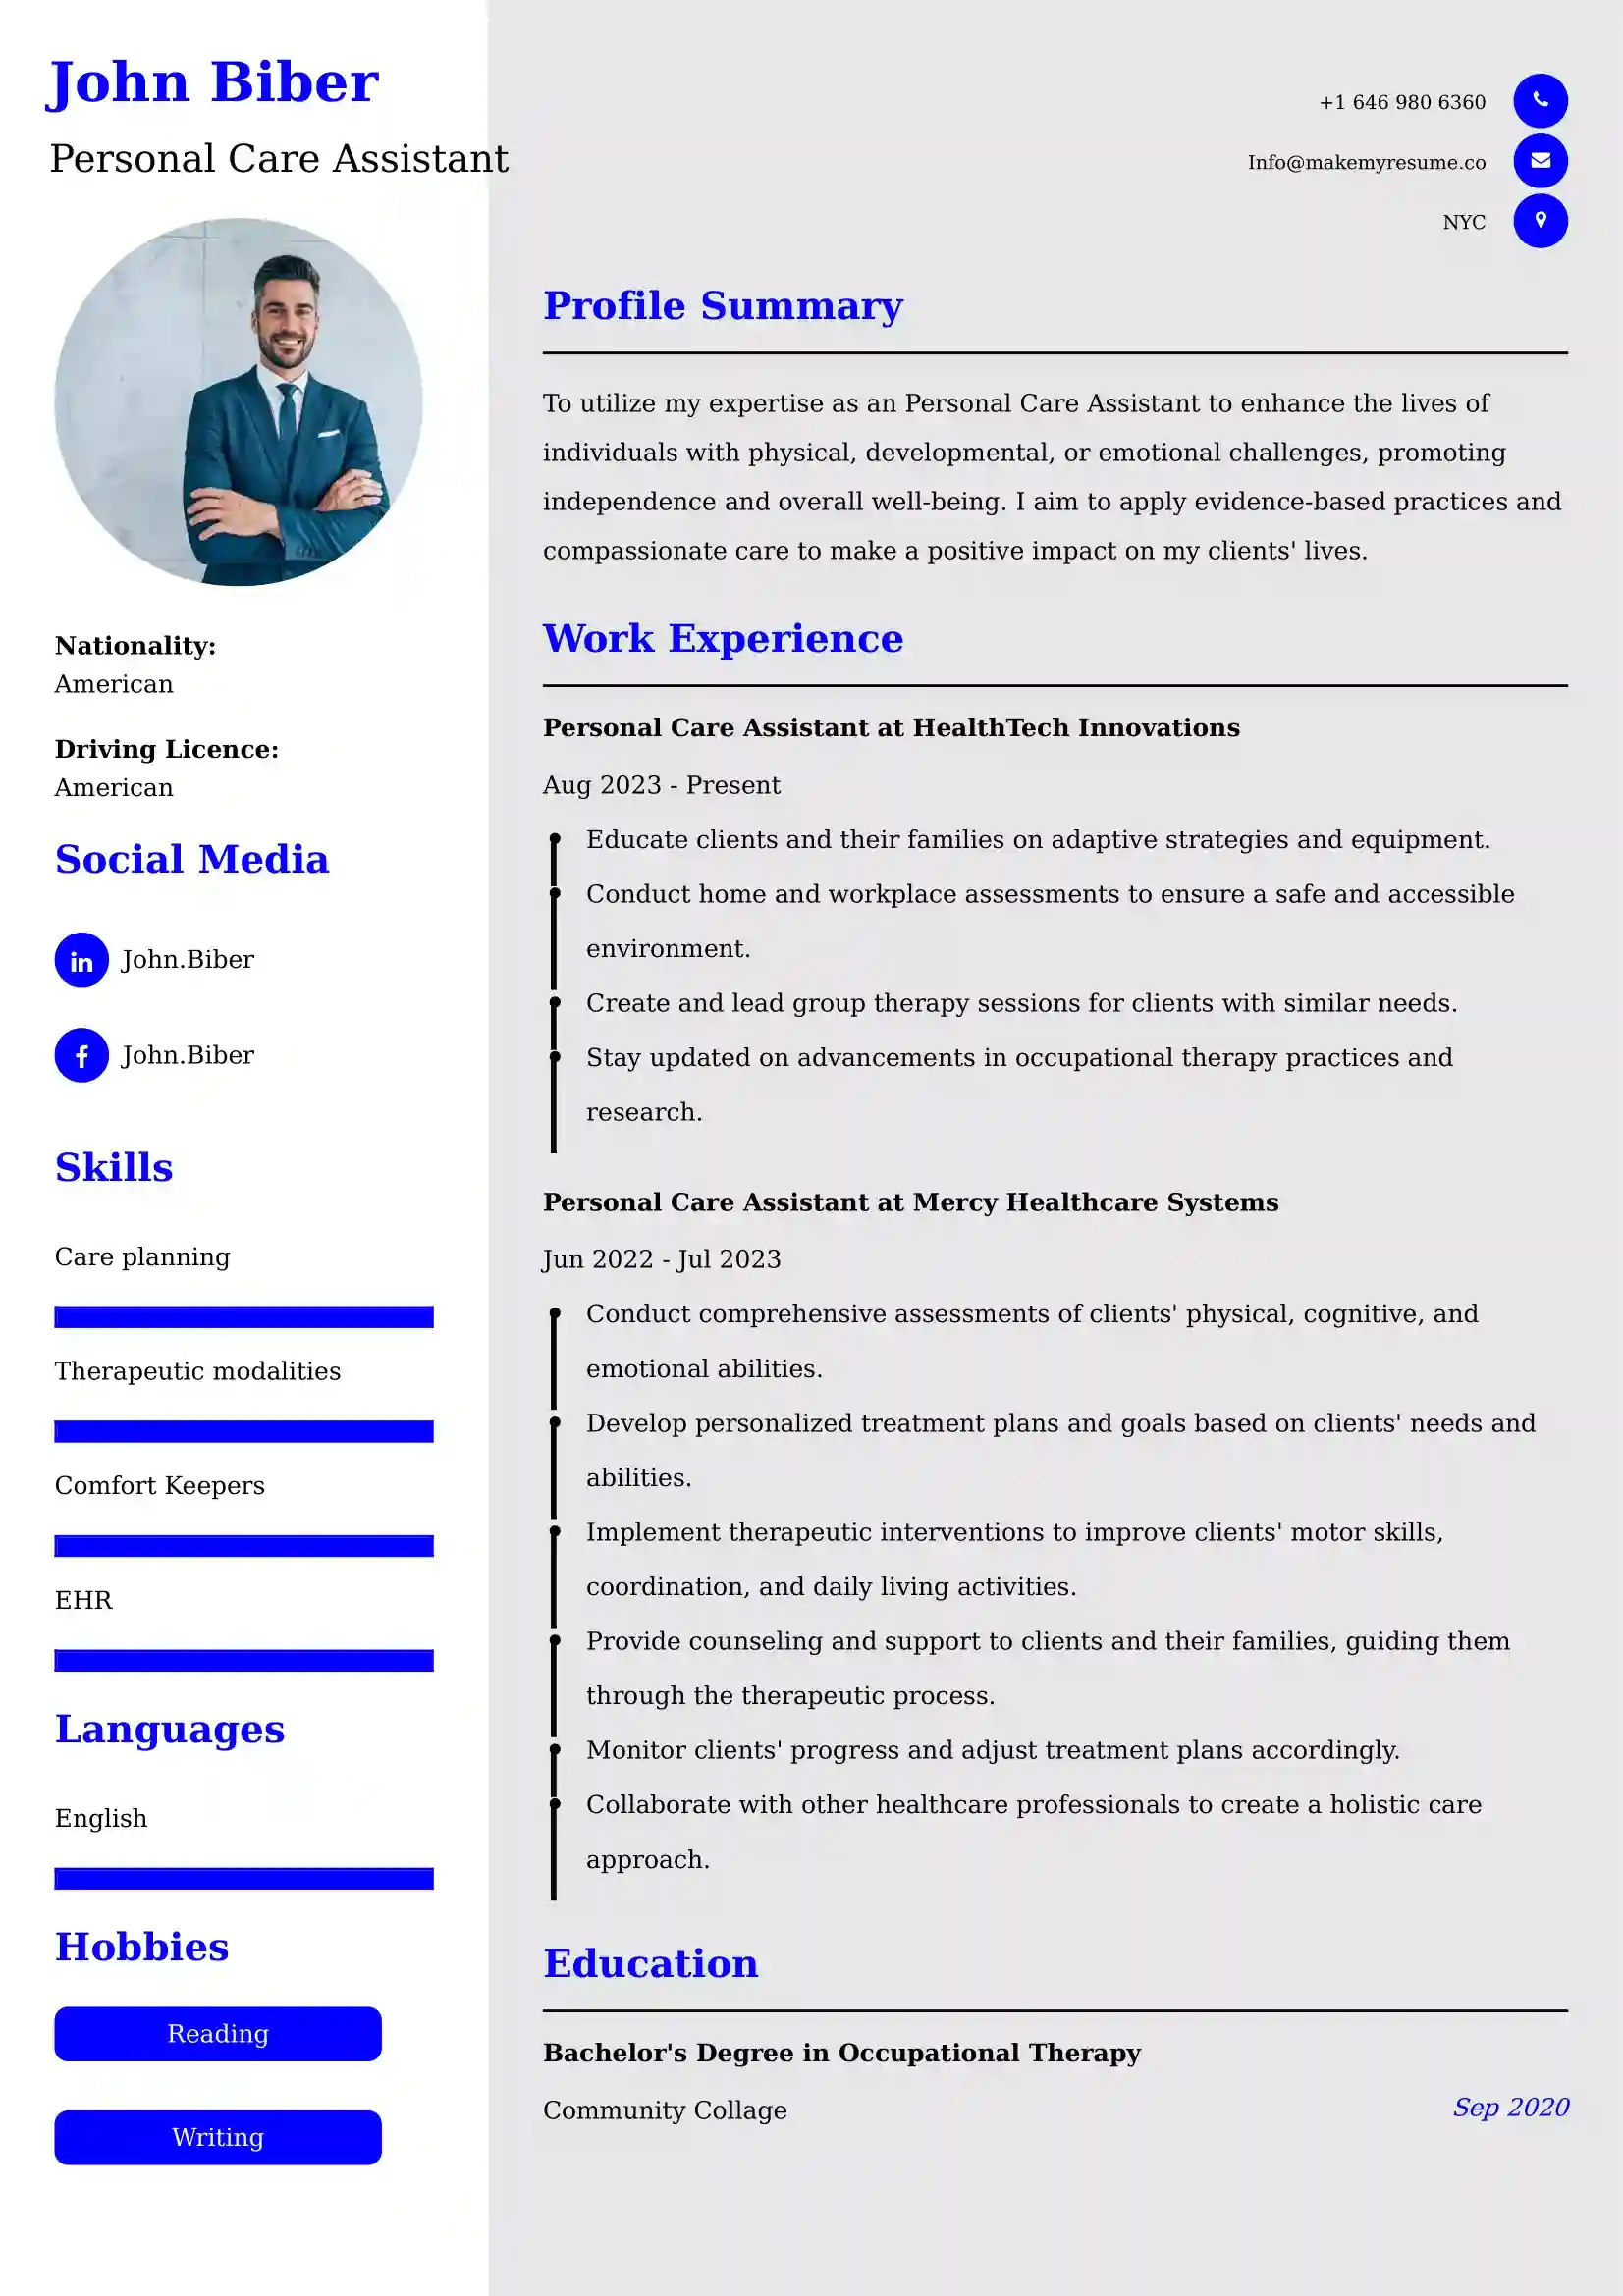 Personal Care Assistant Resume Examples - UK Format, Latest Template.